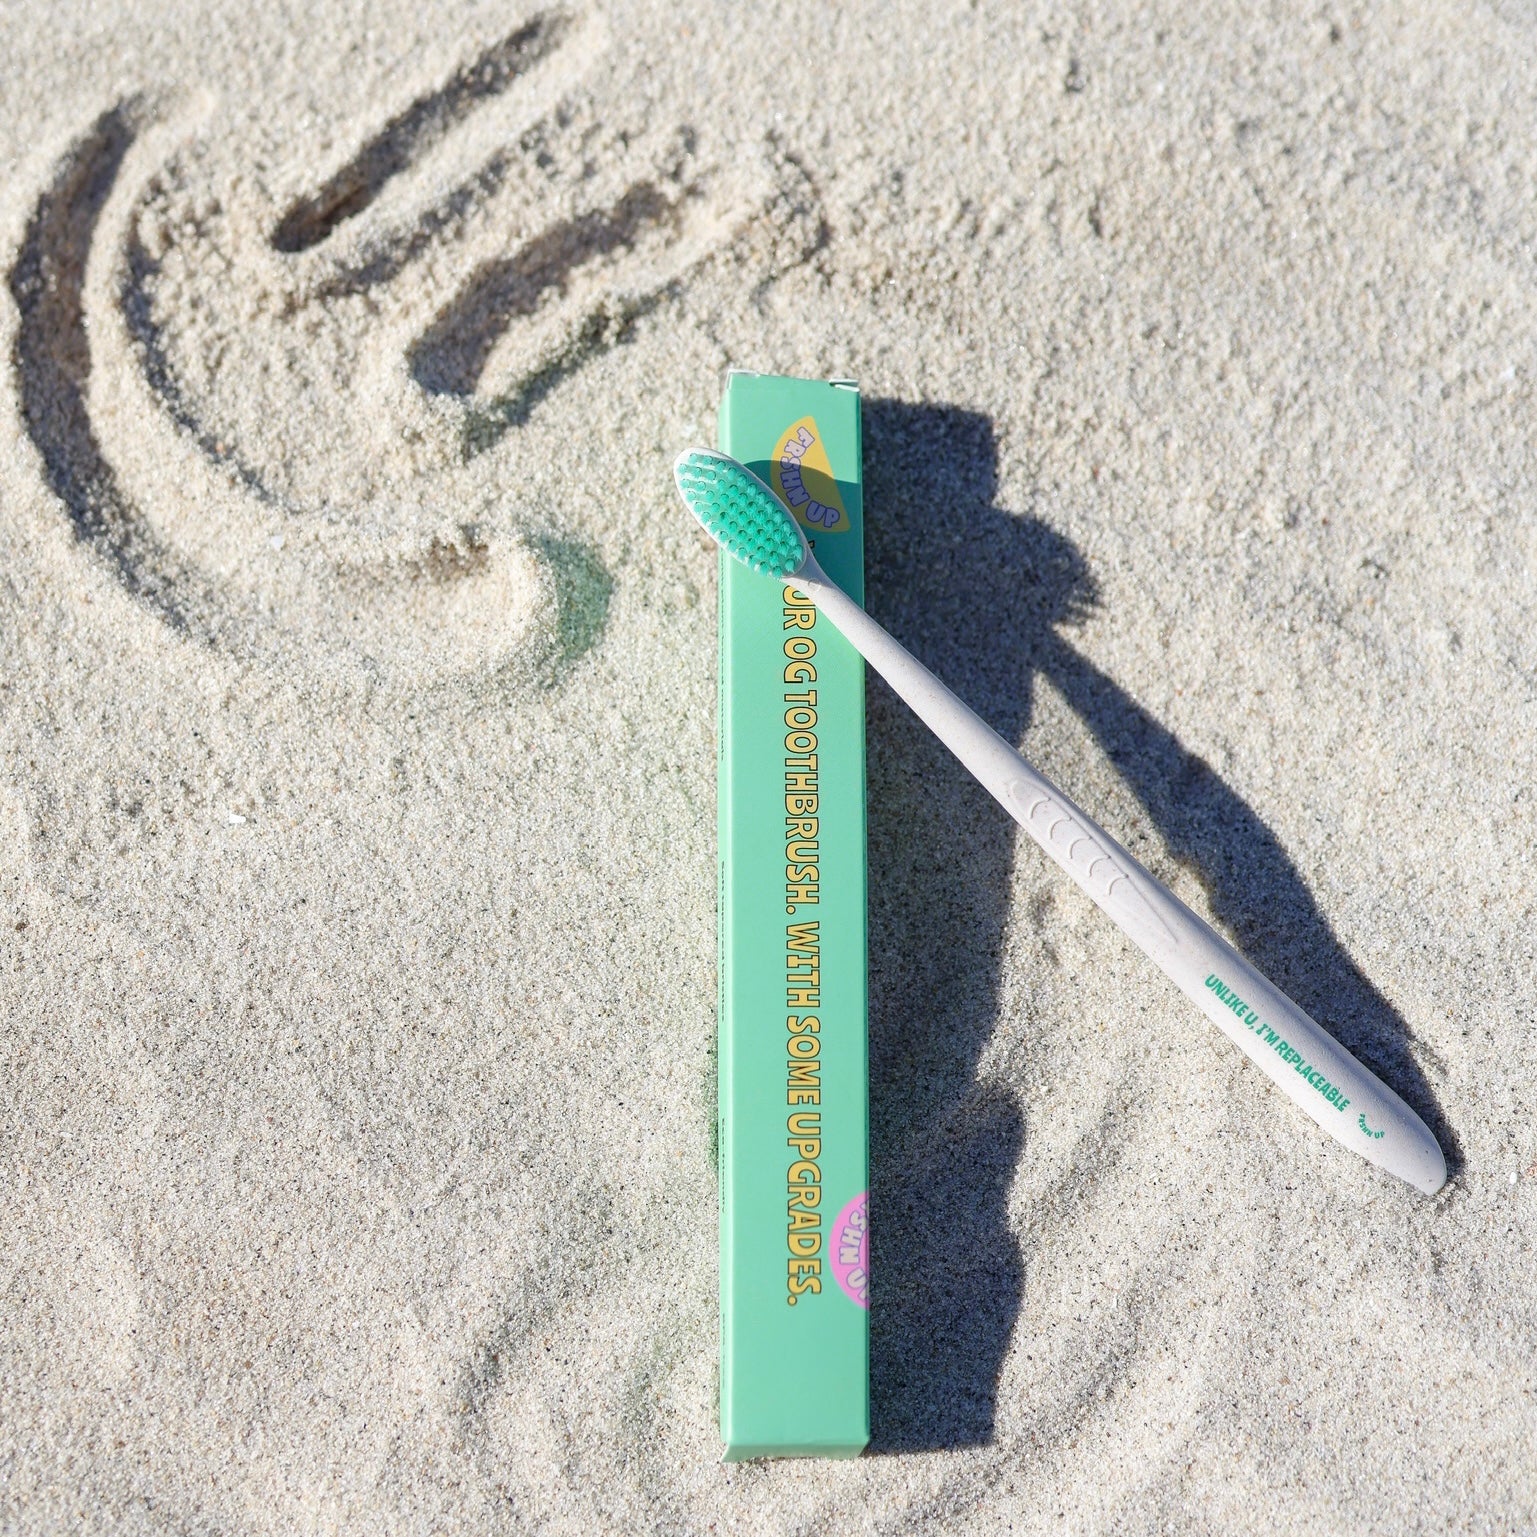 A FRSHN UP Ultimate Lightening Whitening Vault toothbrush lying on sand next to its packaging with a sun design drawn in the background, embodying the essence of oral care.